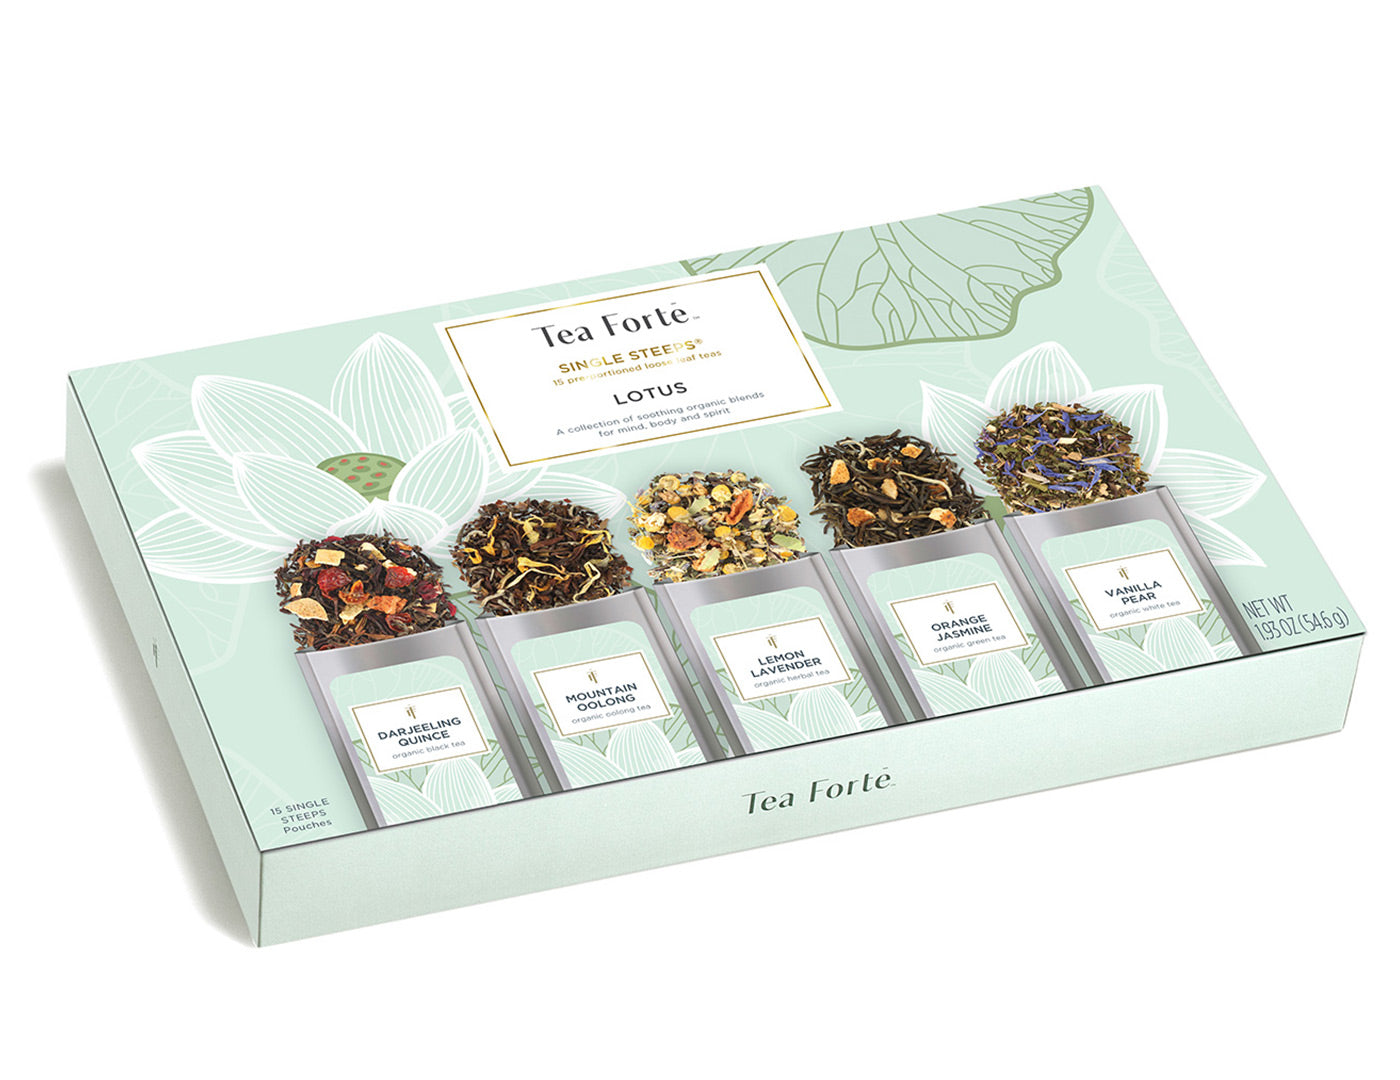 Lotus tea assortment in a 15 count box of Single Steeps pouches, lid closed